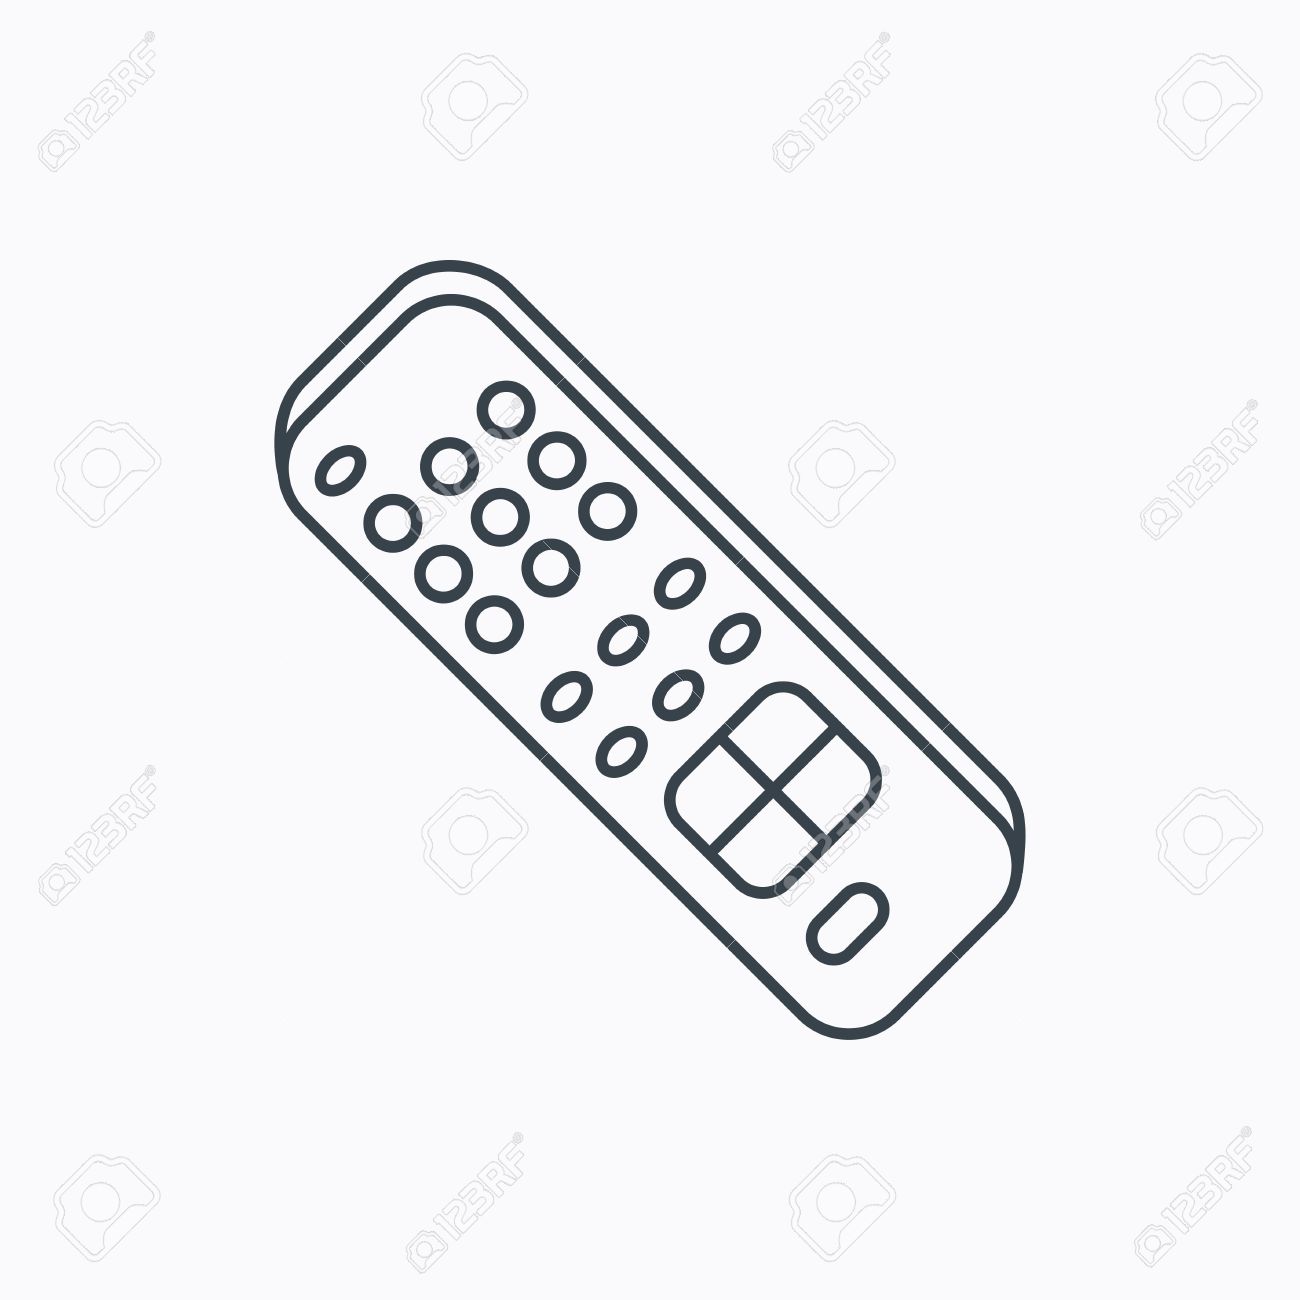 Remote Control Drawing at GetDrawings Free download